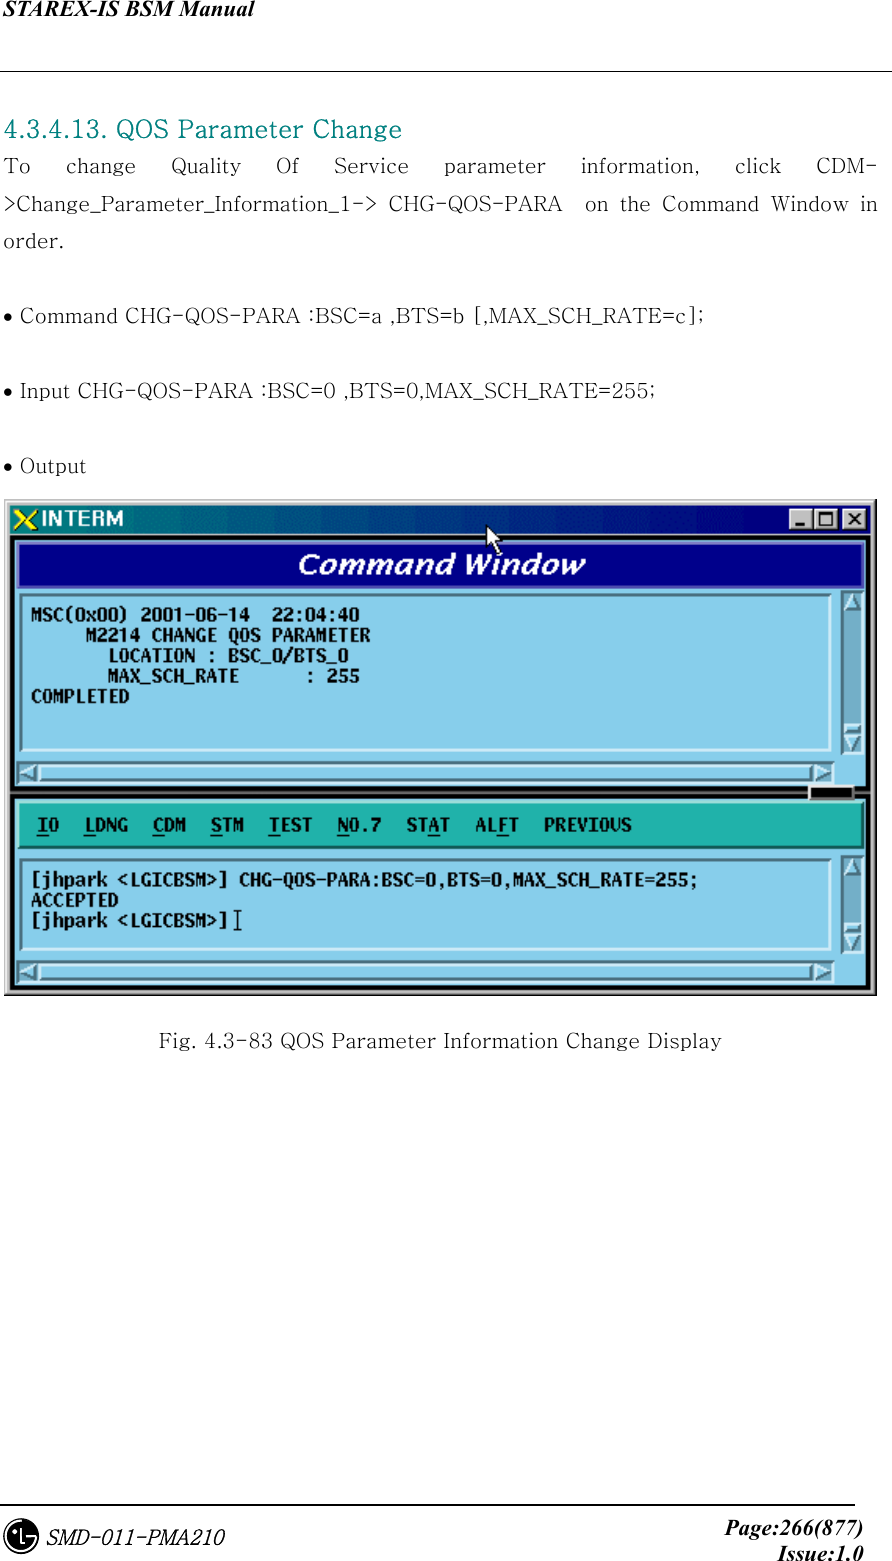 STAREX-IS BSM Manual     Page:266(877)Issue:1.0SMD-011-PMA210  4.3.4.13. QOS Parameter Change To  change  Quality  Of  Service  parameter  information,  click  CDM-&gt;Change_Parameter_Information_1-&gt;  CHG-QOS-PARA    on  the  Command  Window  in order.  • Command CHG-QOS-PARA :BSC=a ,BTS=b [,MAX_SCH_RATE=c];  • Input CHG-QOS-PARA :BSC=0 ,BTS=0,MAX_SCH_RATE=255;  • Output  Fig. 4.3-83 QOS Parameter Information Change Display